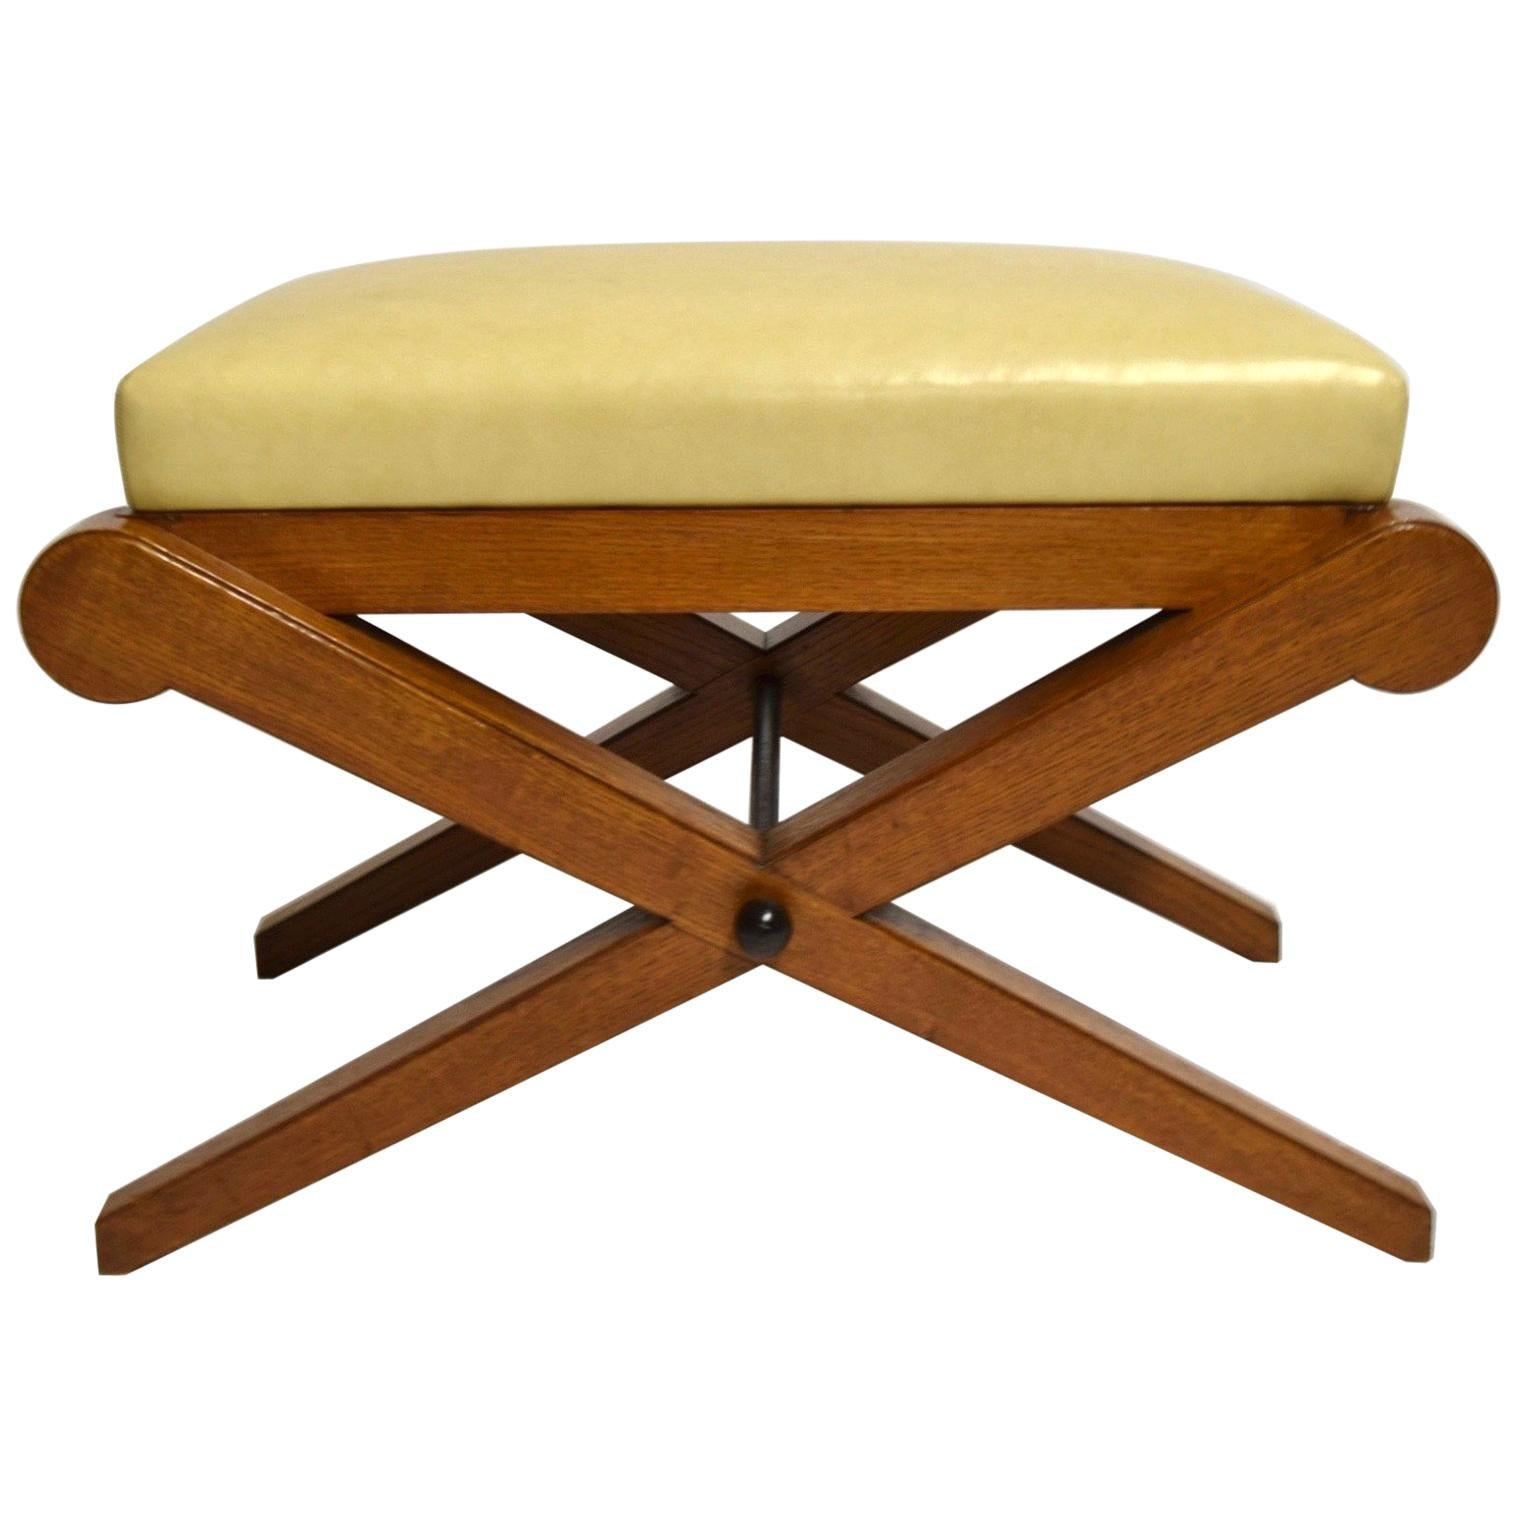 French Deco Bench / Footstool, circa 1930 Made in France